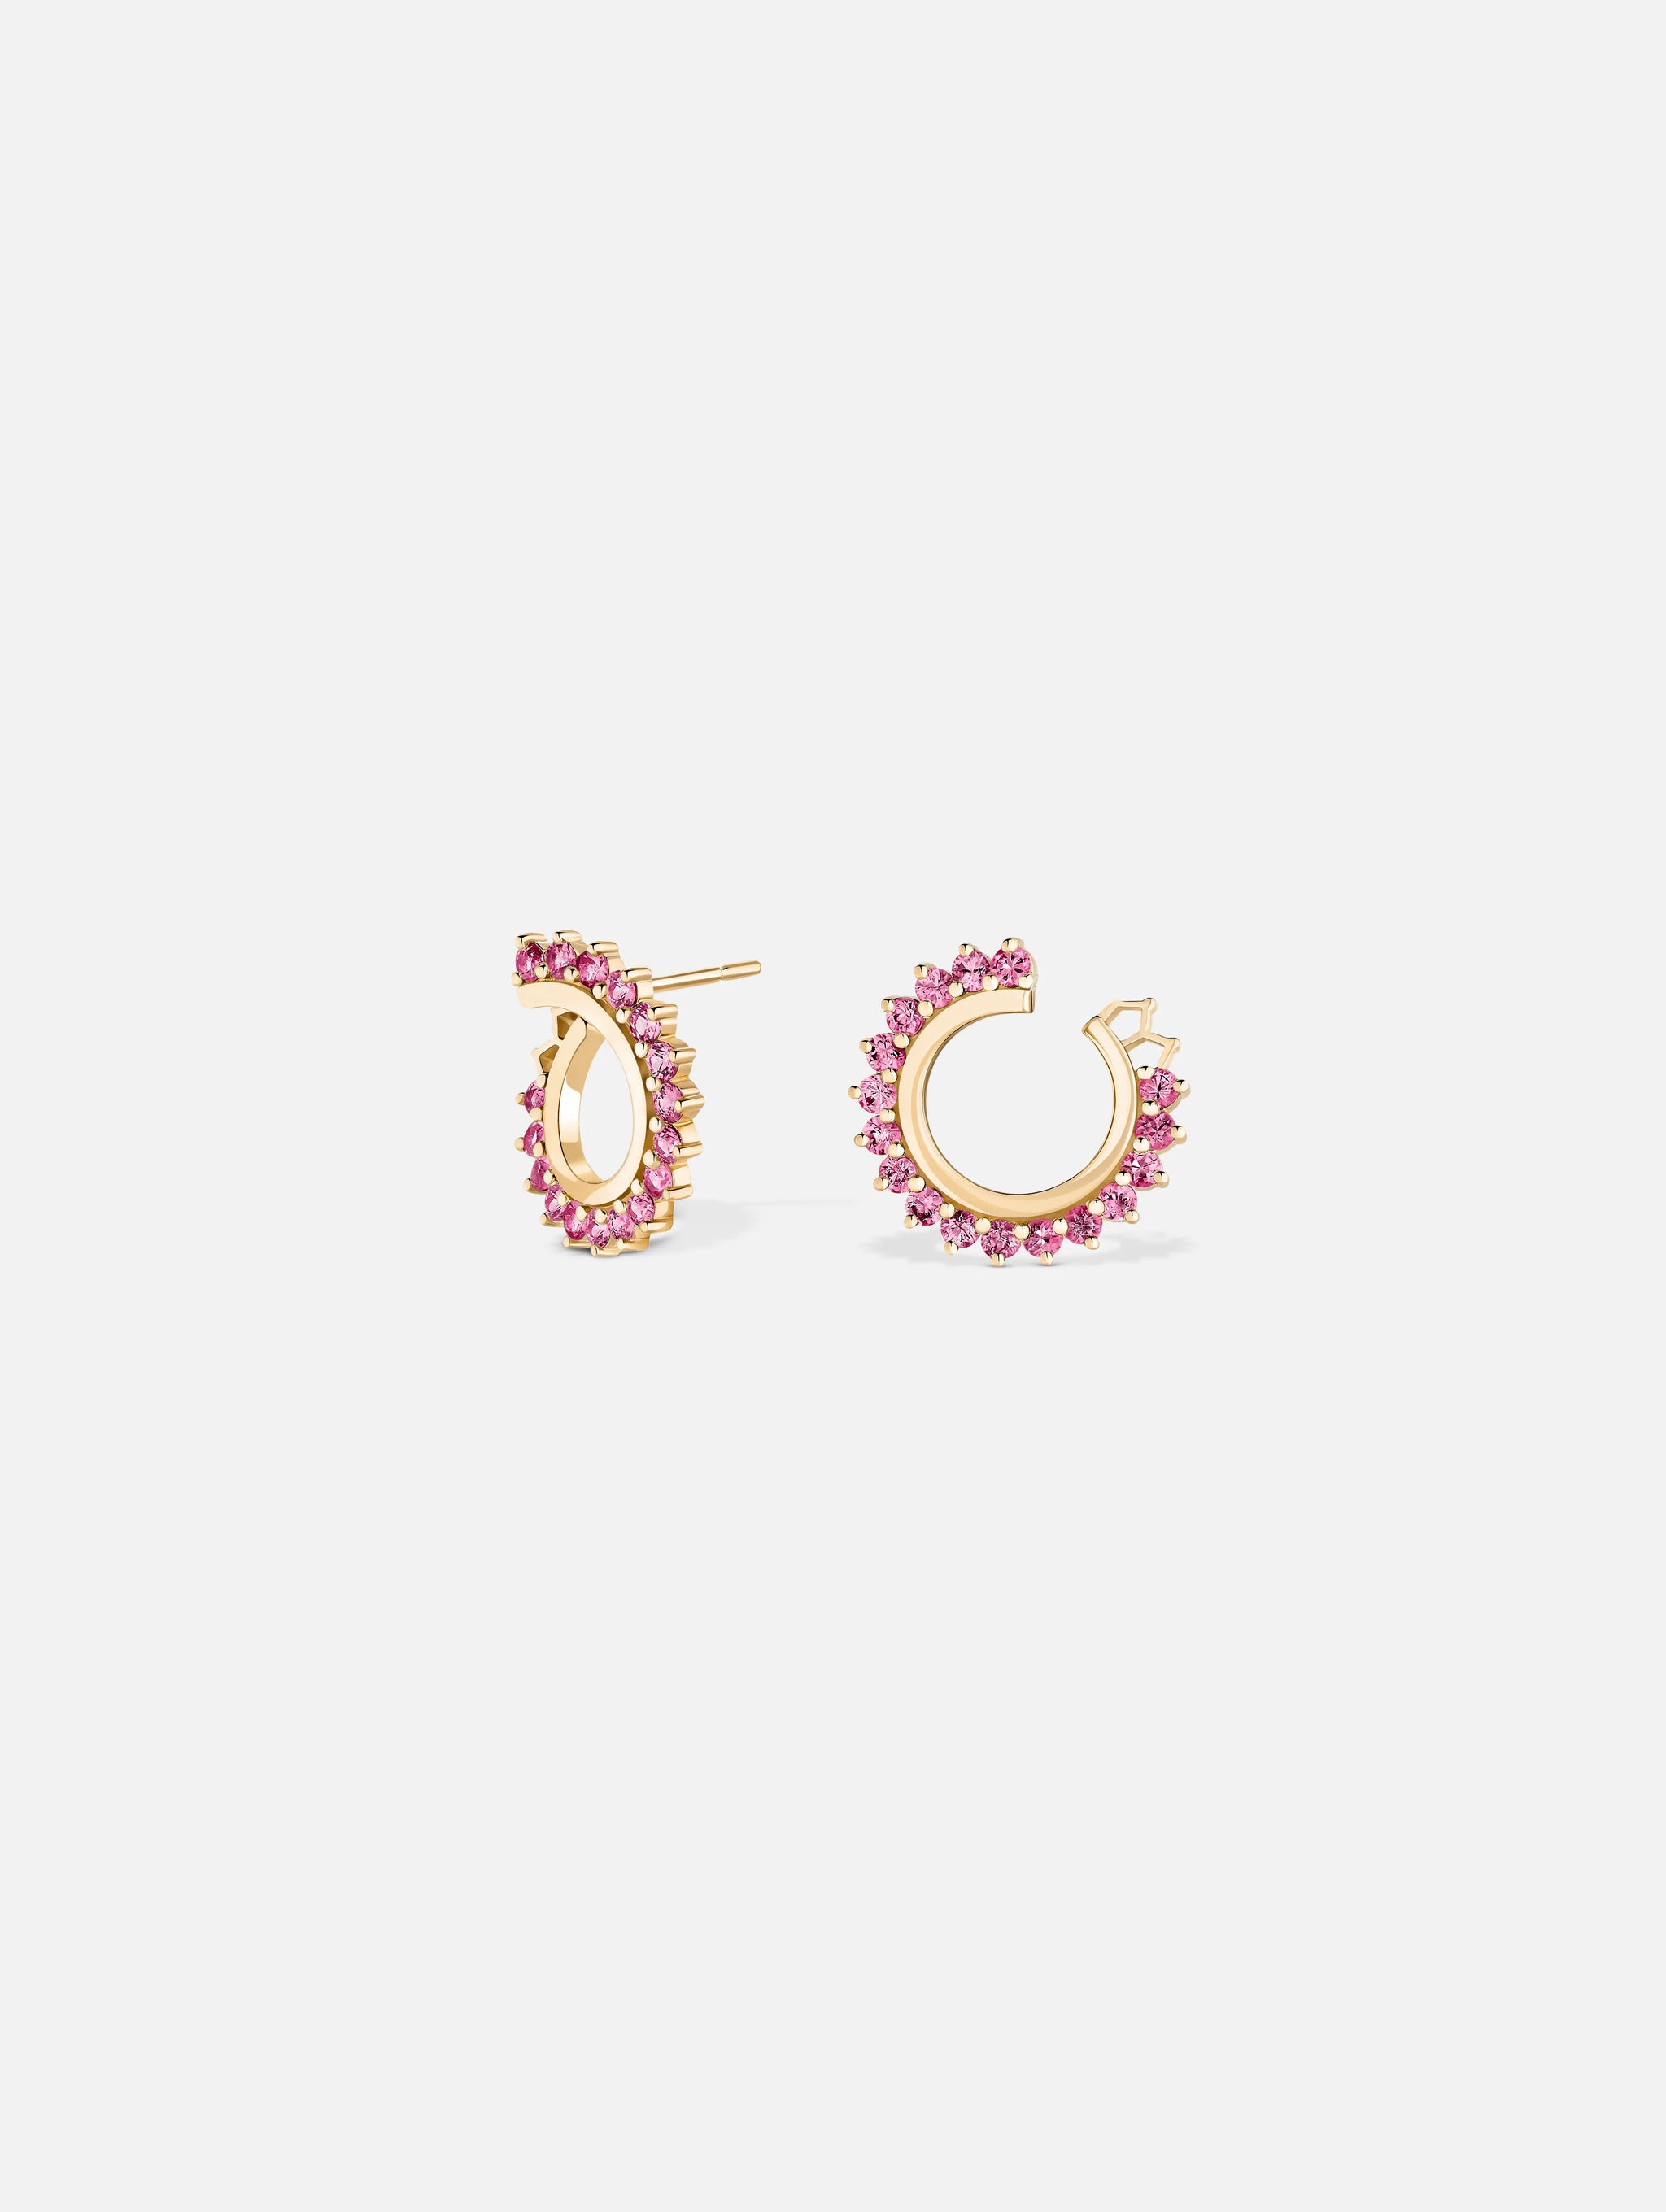 Pink Sapphire Earrings in Yellow Gold - 1 - Nouvel Heritage